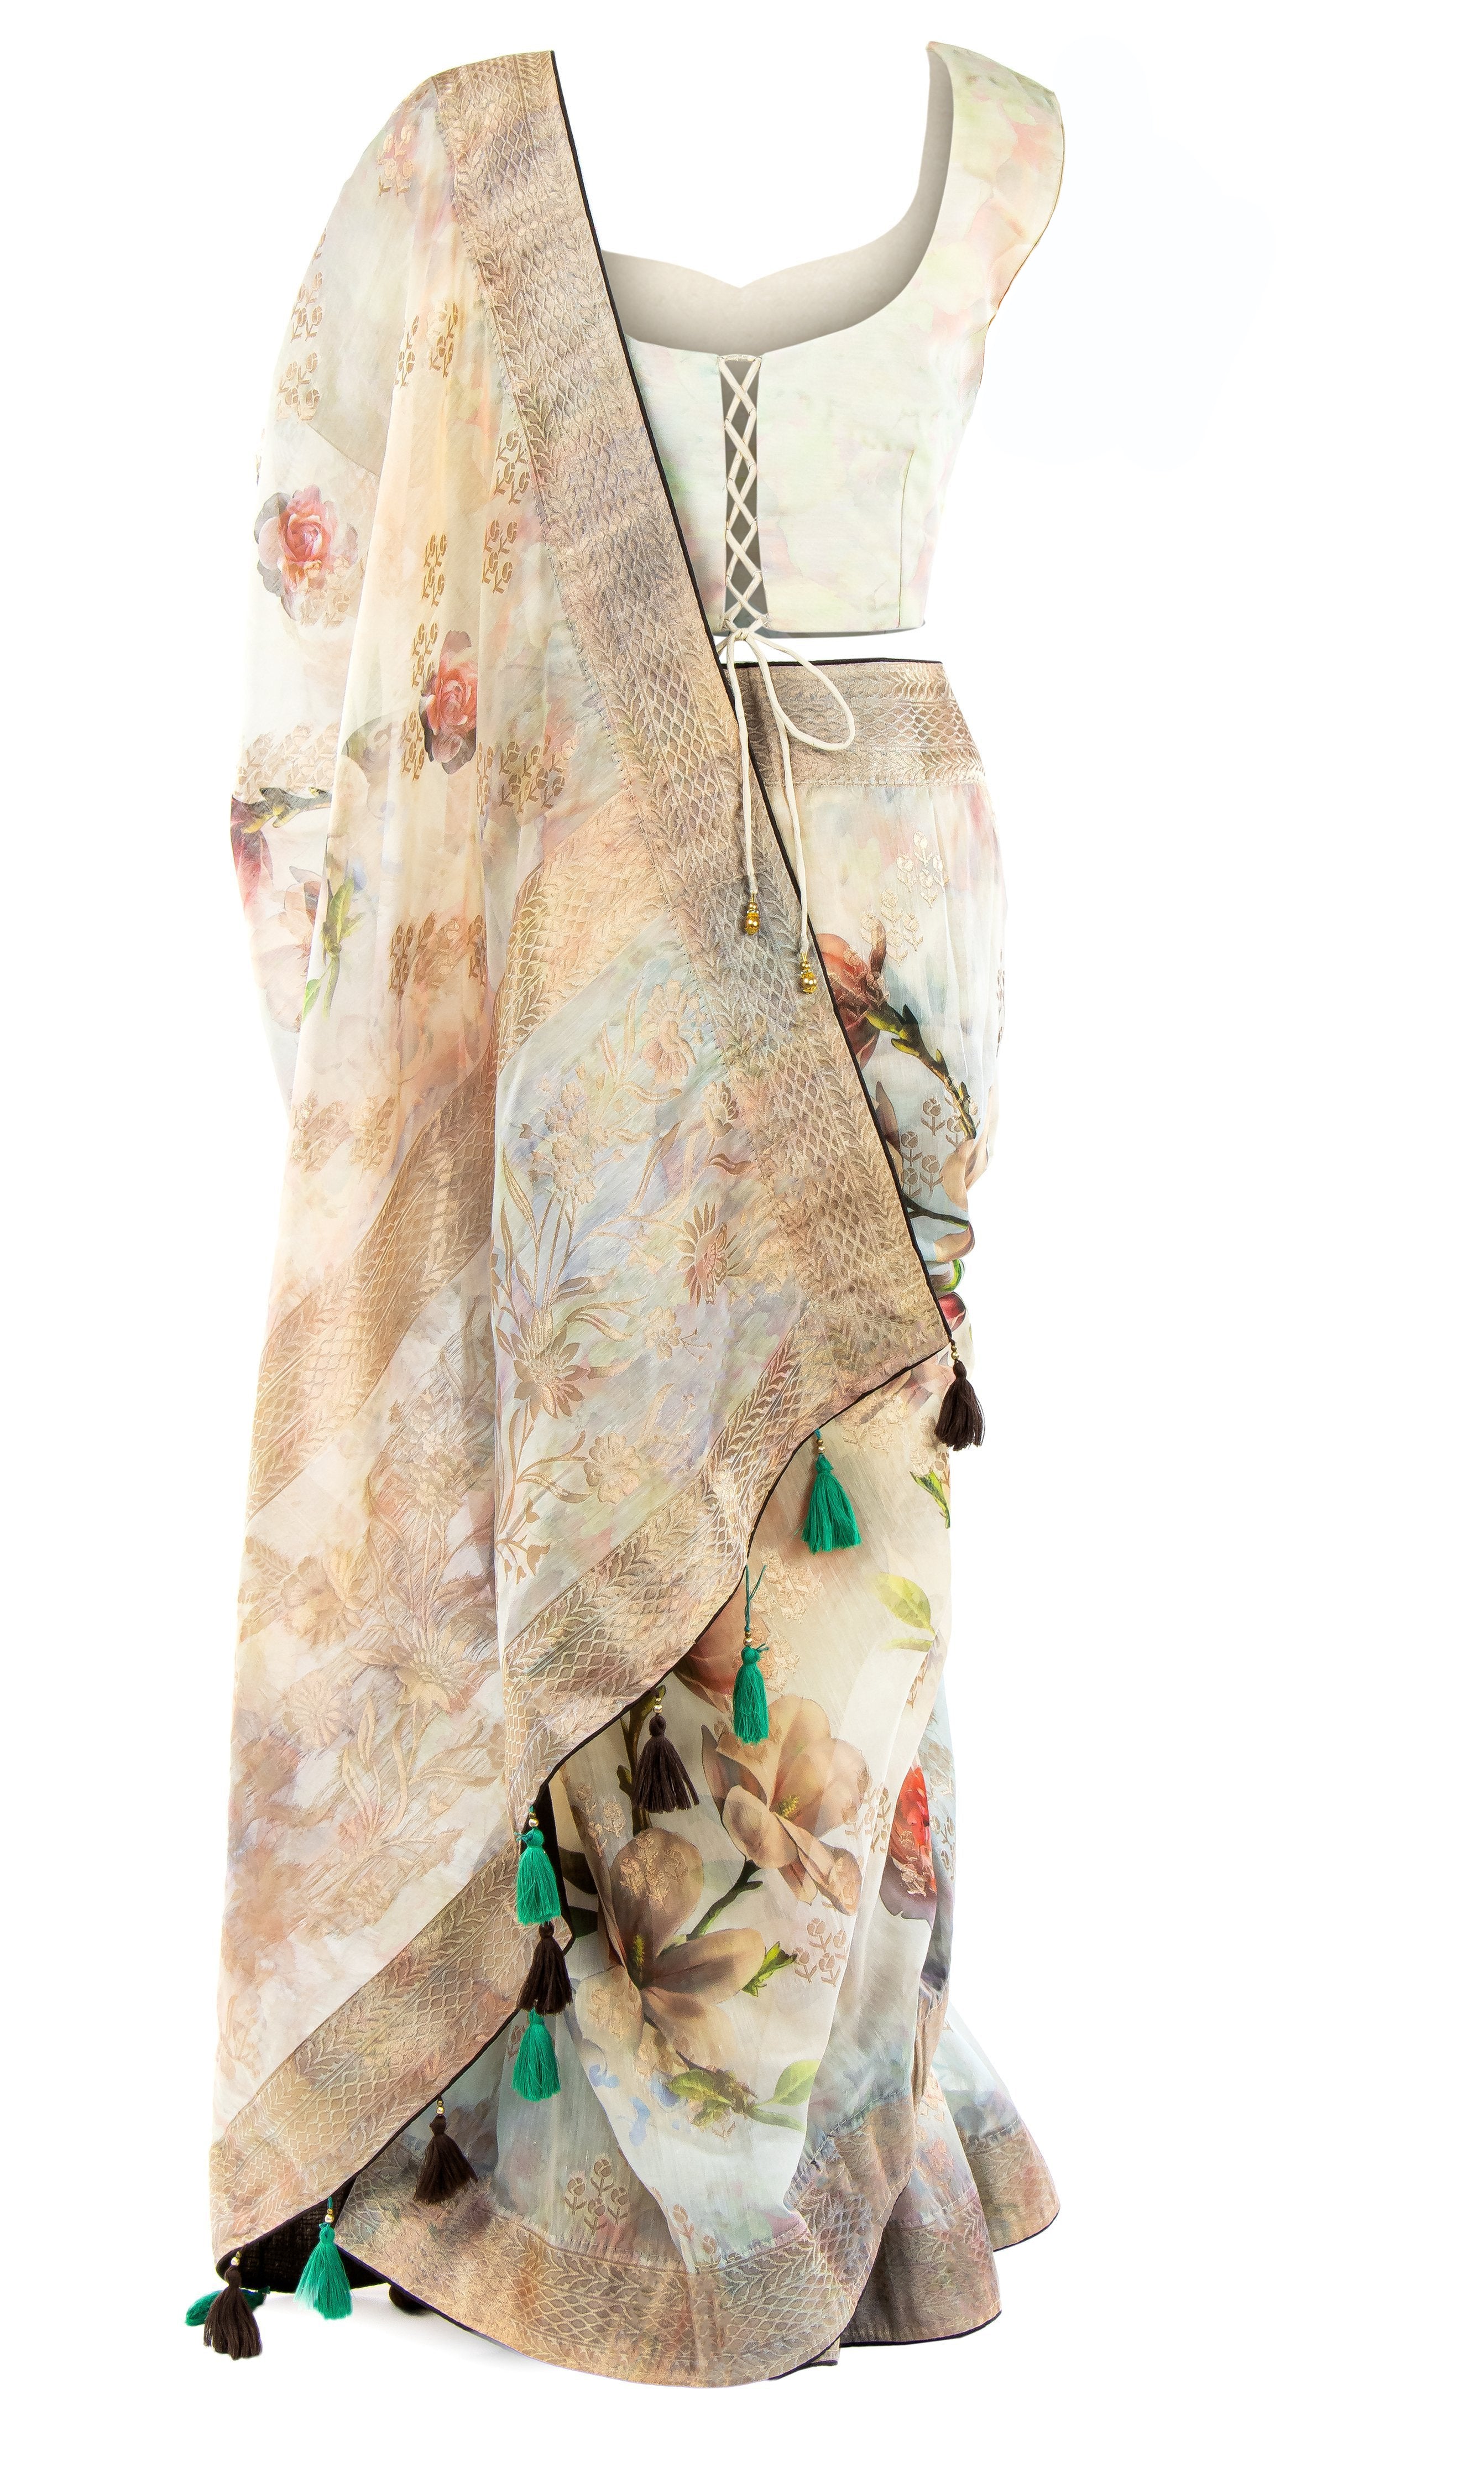 Pre-pleated Neutral linen Saree with a multicolor floral pattern & has a adjustable Blouse